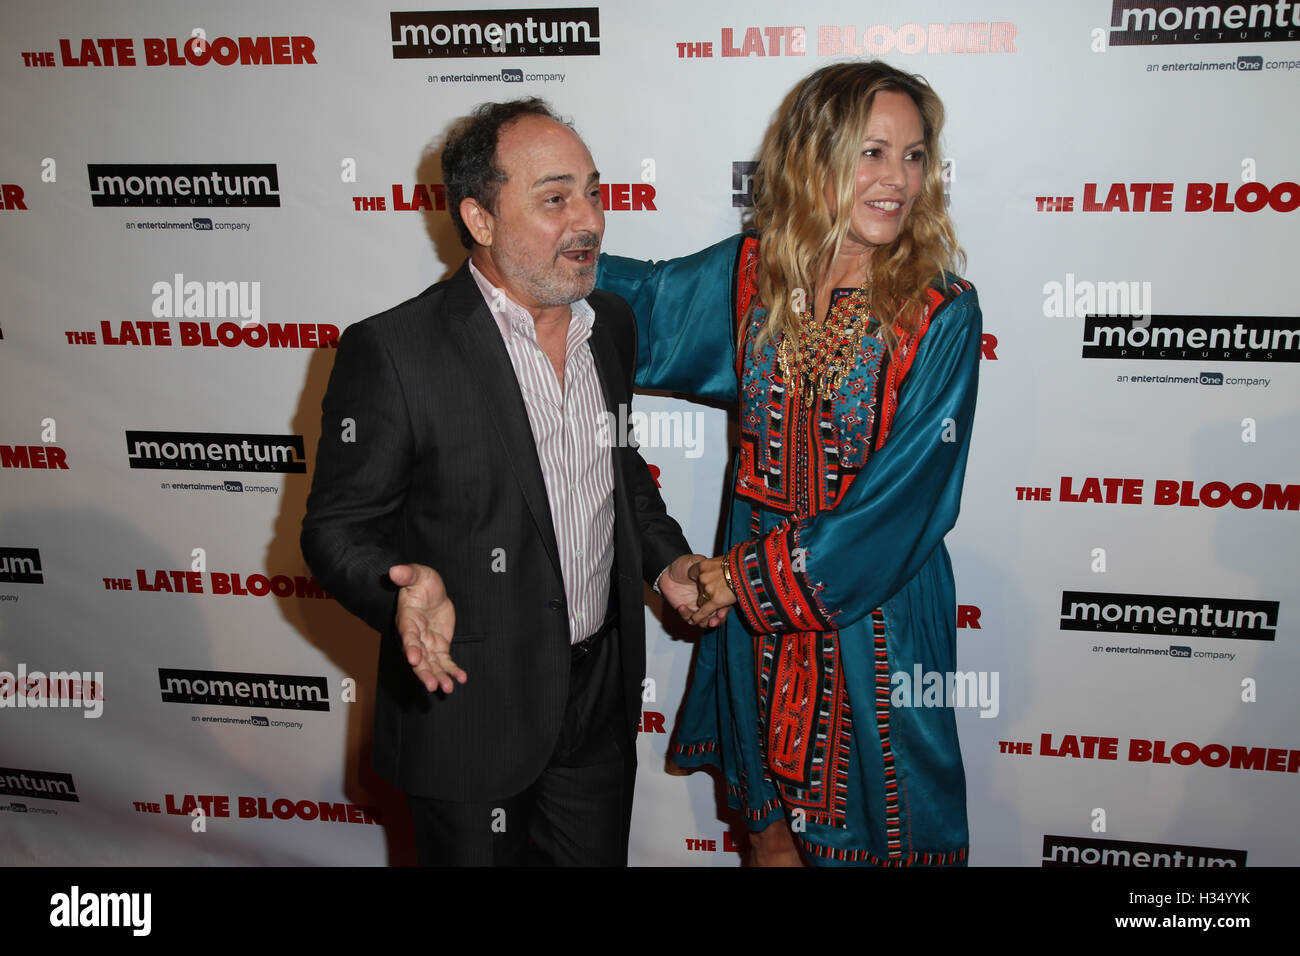 Los Angeles, Ca, USA. 03rd Oct, 2016. Kevin Pollak, Maria Bello attends the premiere of Momentum Pictures' 'The Late Bloomer' at iPic Theaters on October 3, 2016 in Los Angeles, California. ( Credit:  Parisa Afsahi/Media Punch)./Alamy Live News Stock Photo